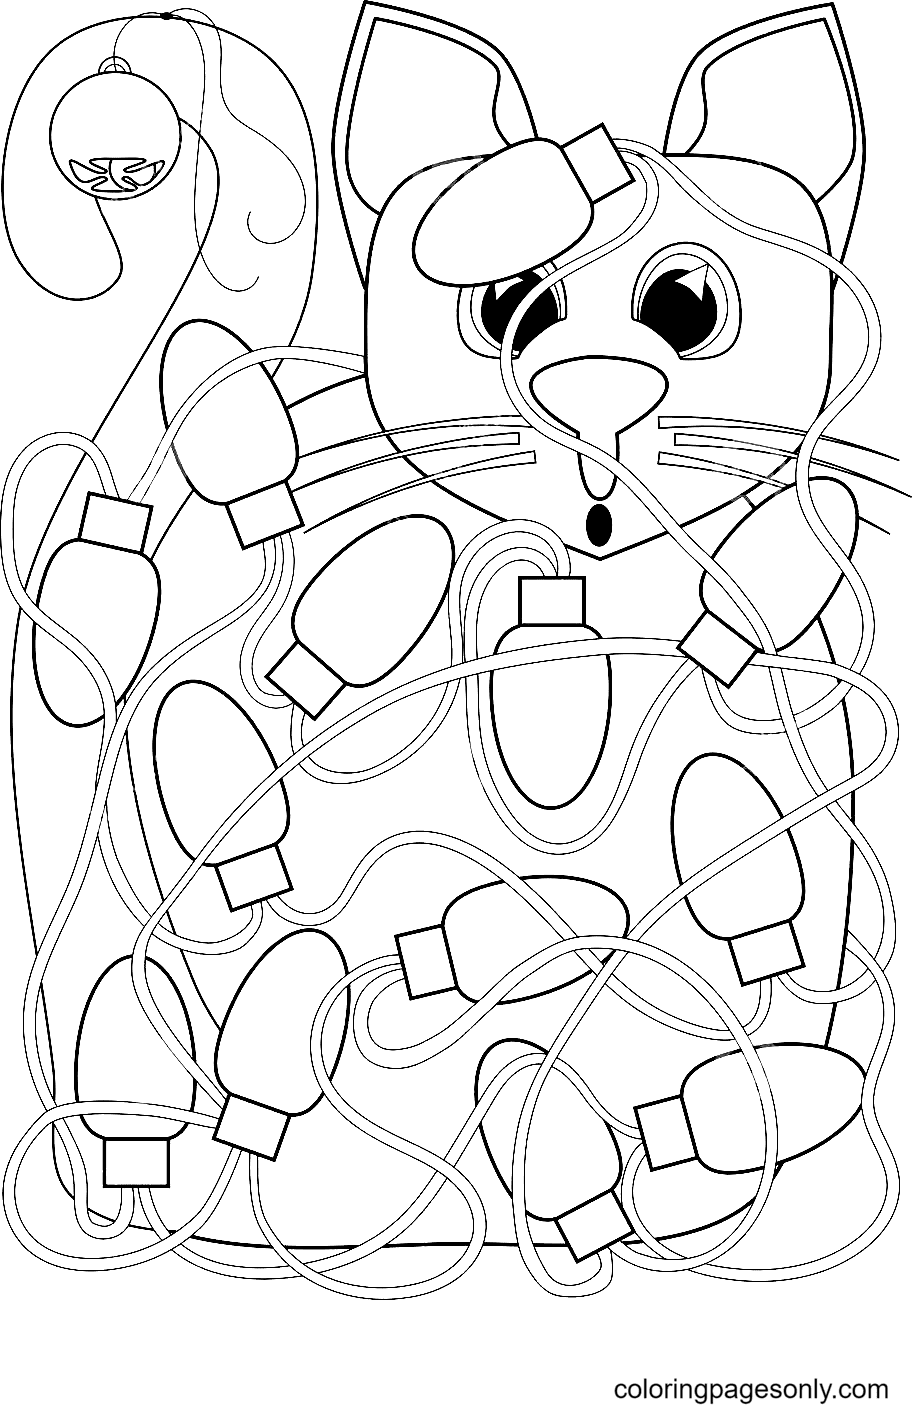 Cat Tangled In Christmas Lights Printable Coloring Page